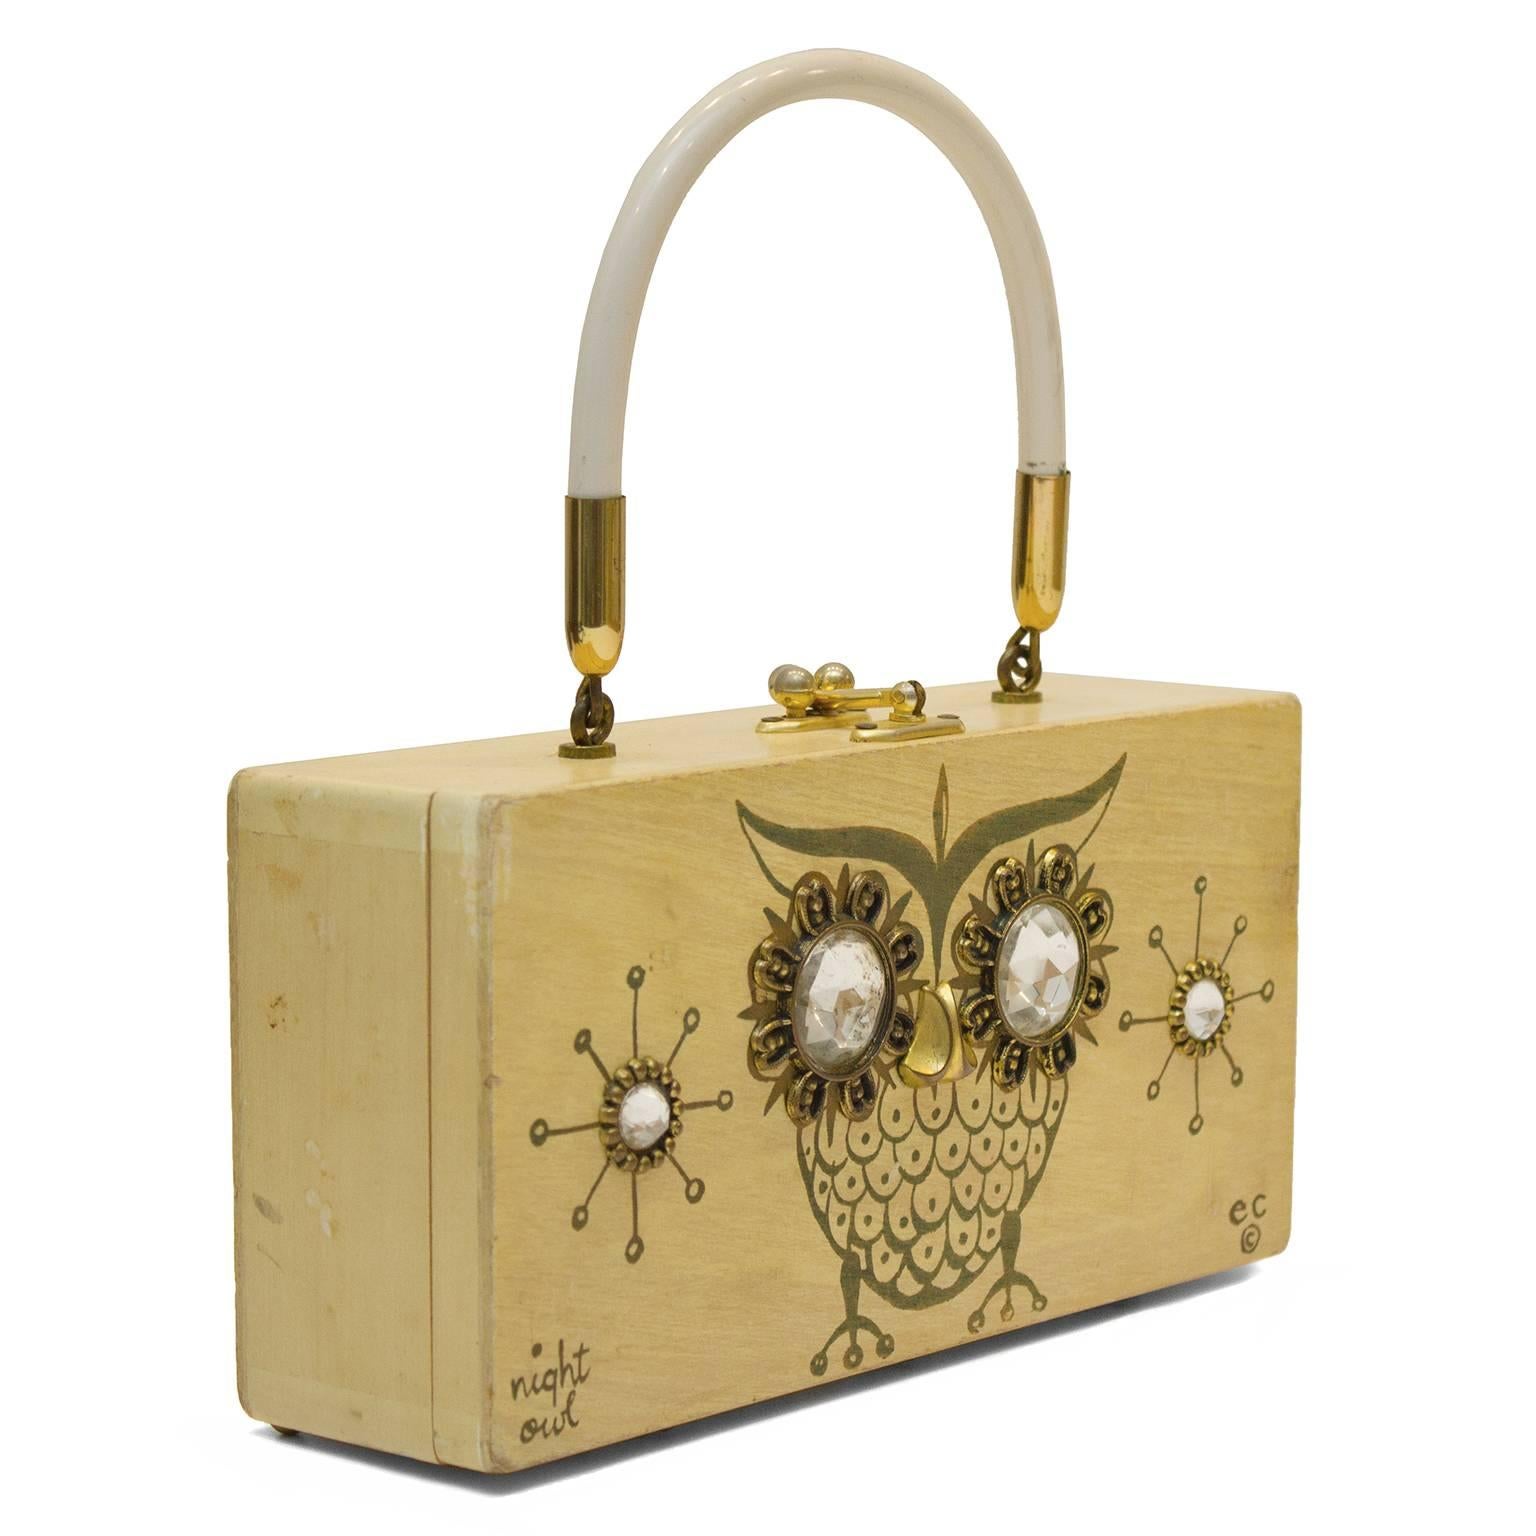 Beautiful 1960's Enid Collins wooden box bag. The body of the bag is made of light wood with an owl motif painted on the front side and adorned with large and medium rhinestones and some brass colored hardware. White rigid top handle is attached